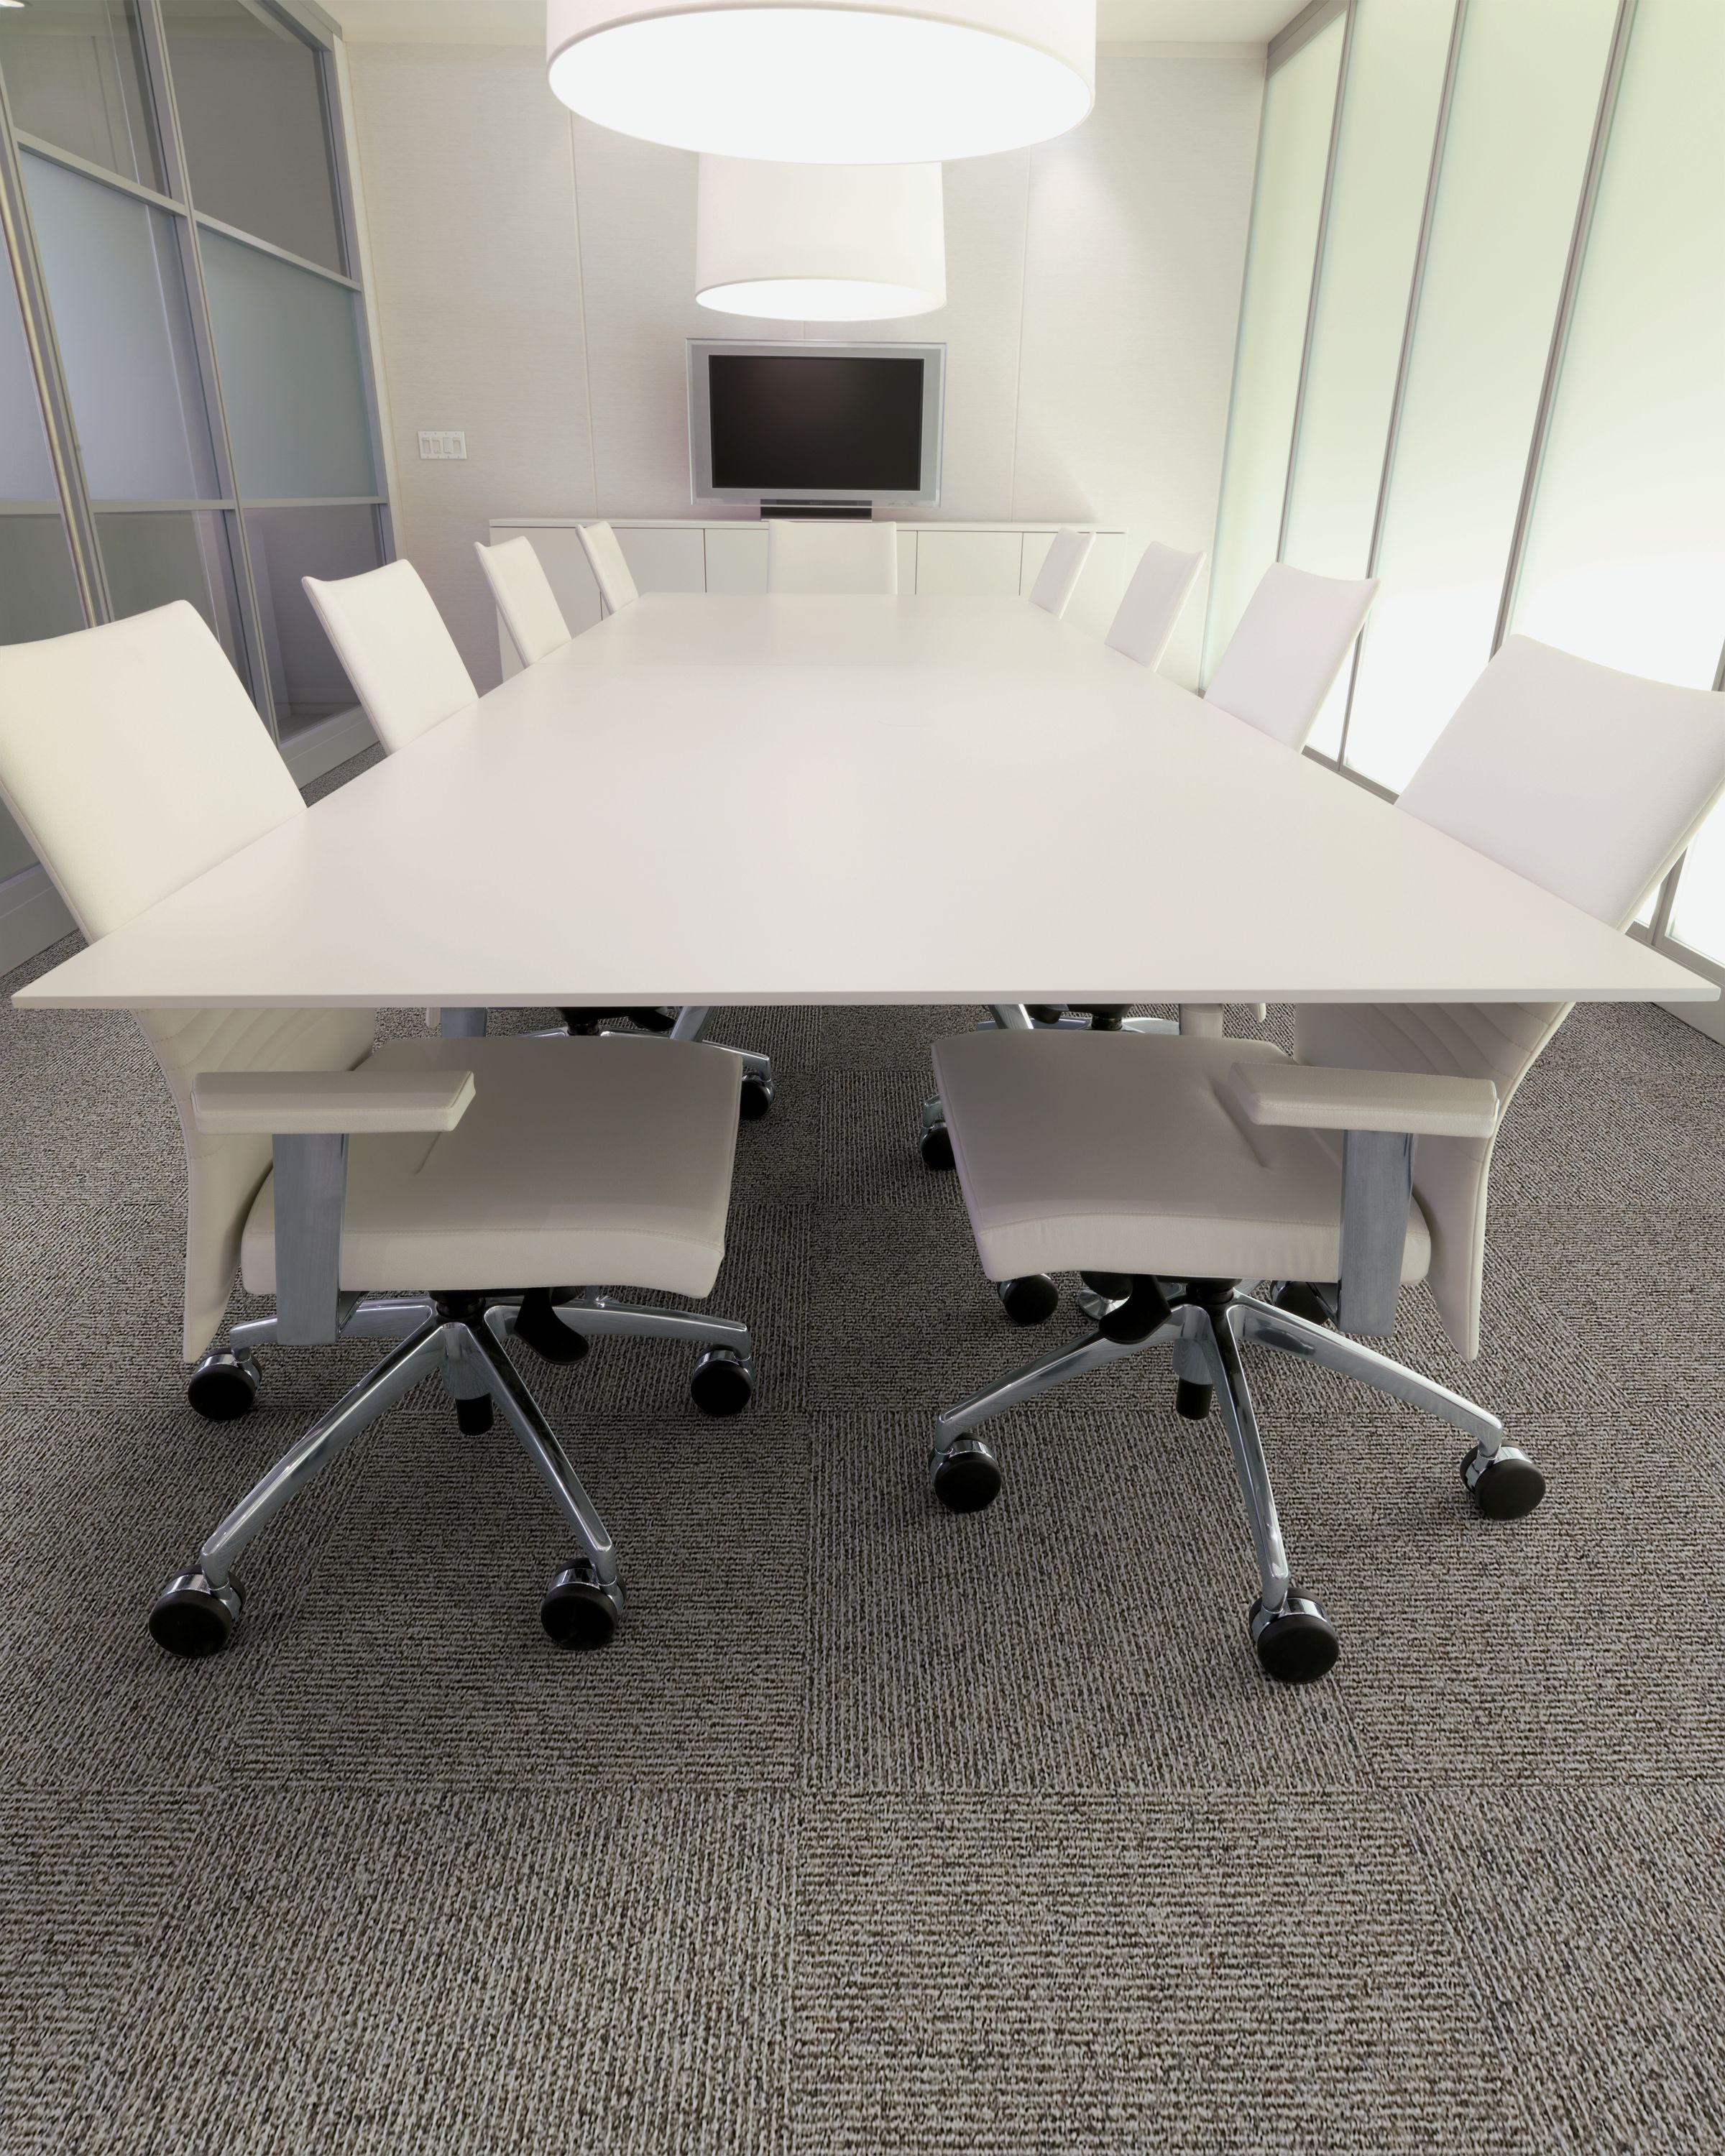 Interface Broomed carpet tile in conference room with long white table and chairs imagen número 1